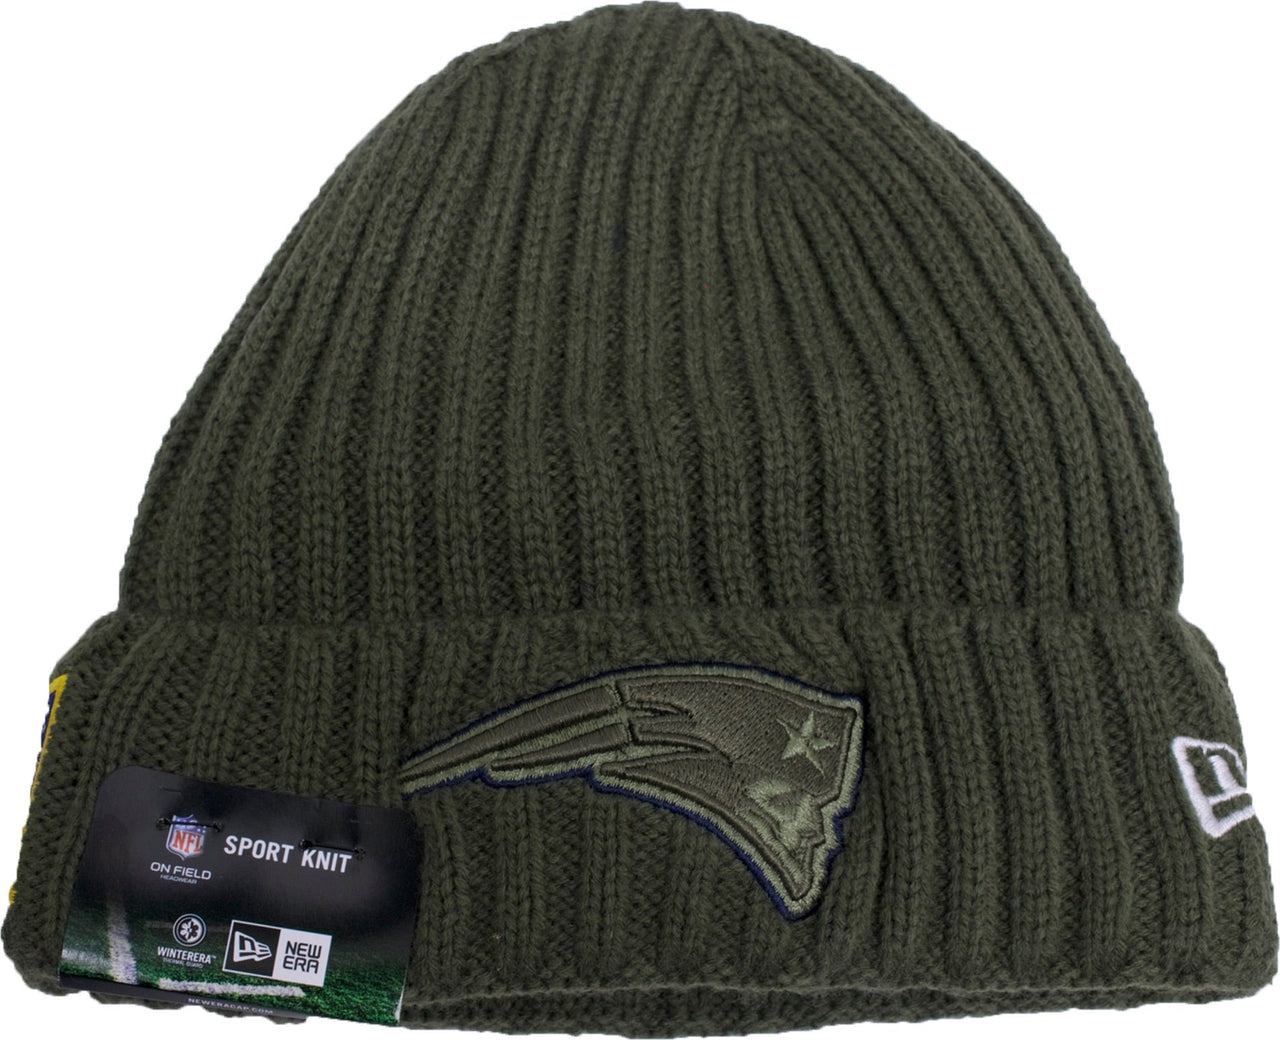 the new england patriots 2017 nfl salute to service beanie has a green patriots logo in the front